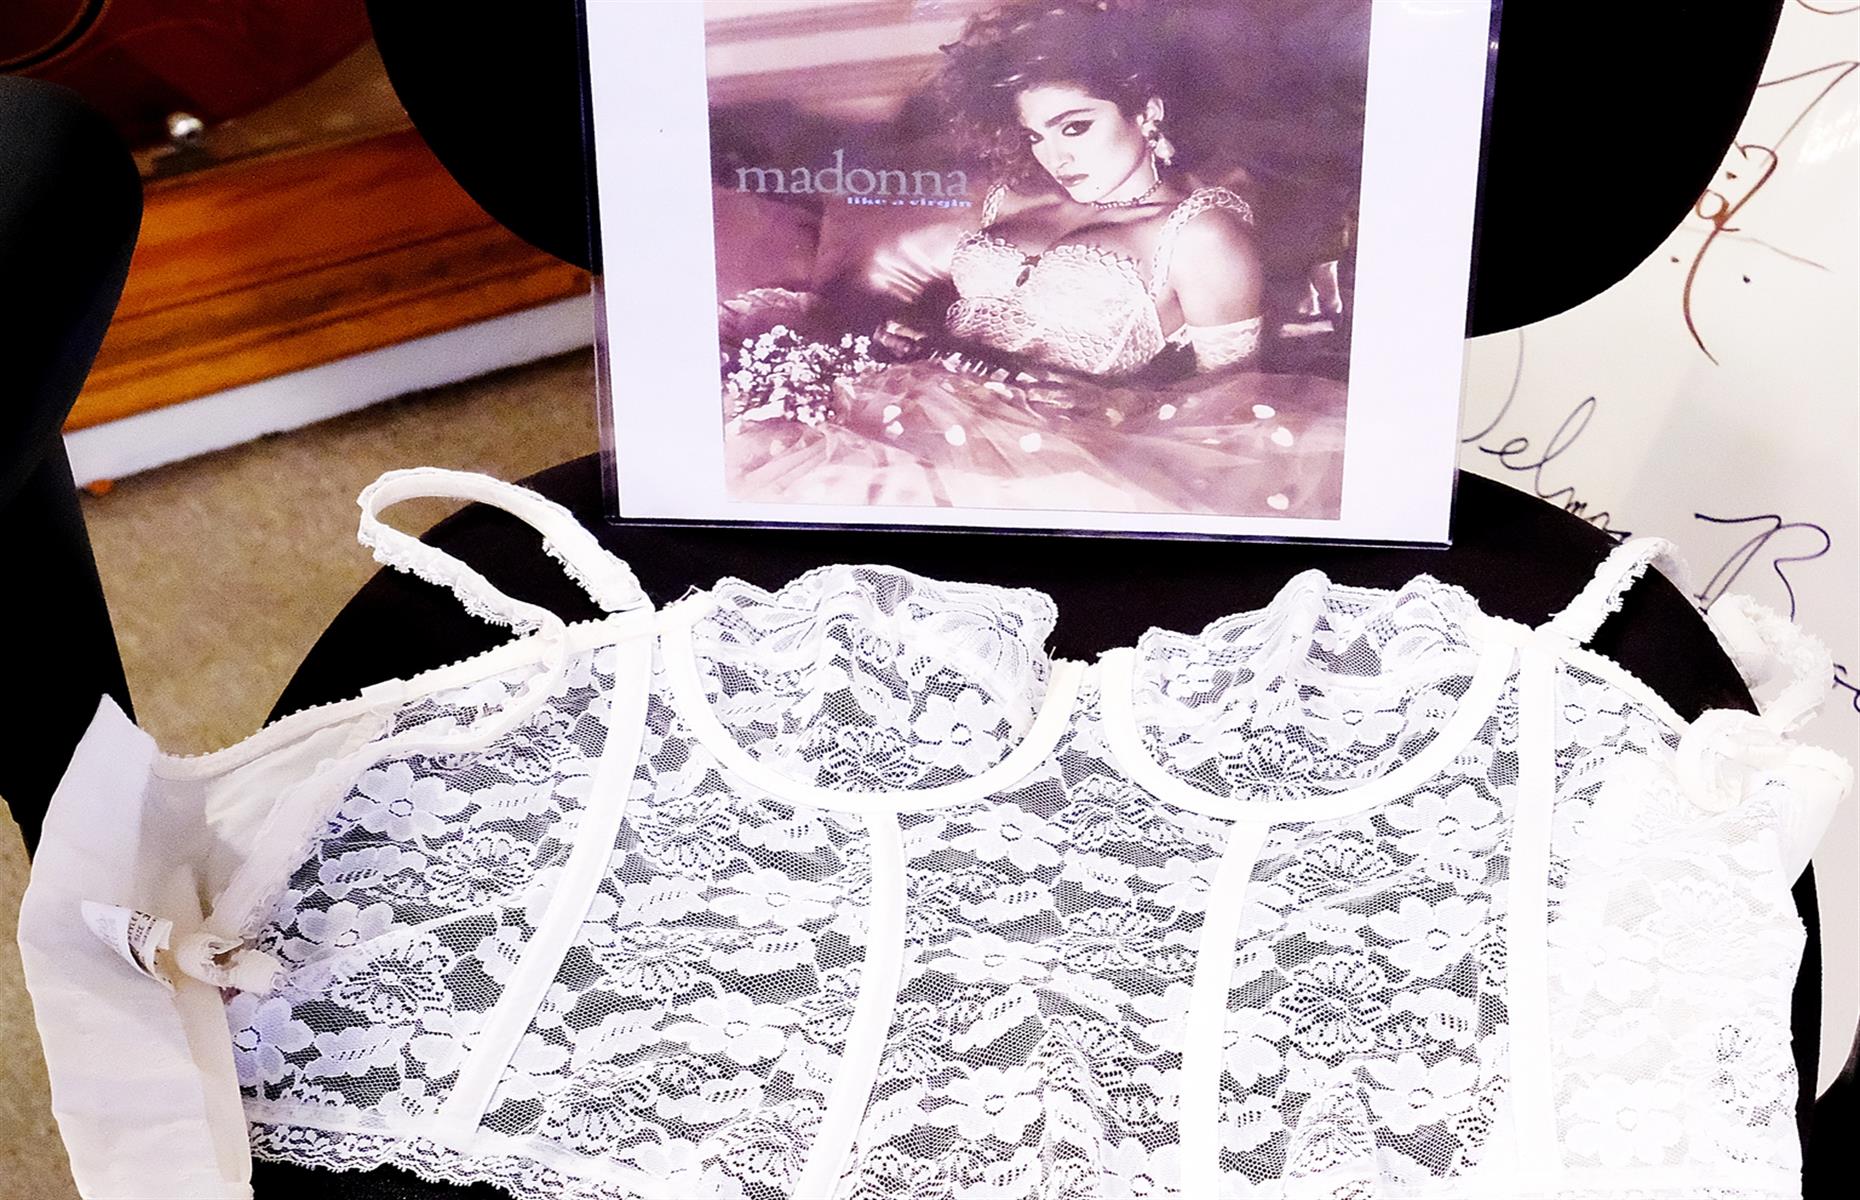 Intimate Madonna items – auction cancelled